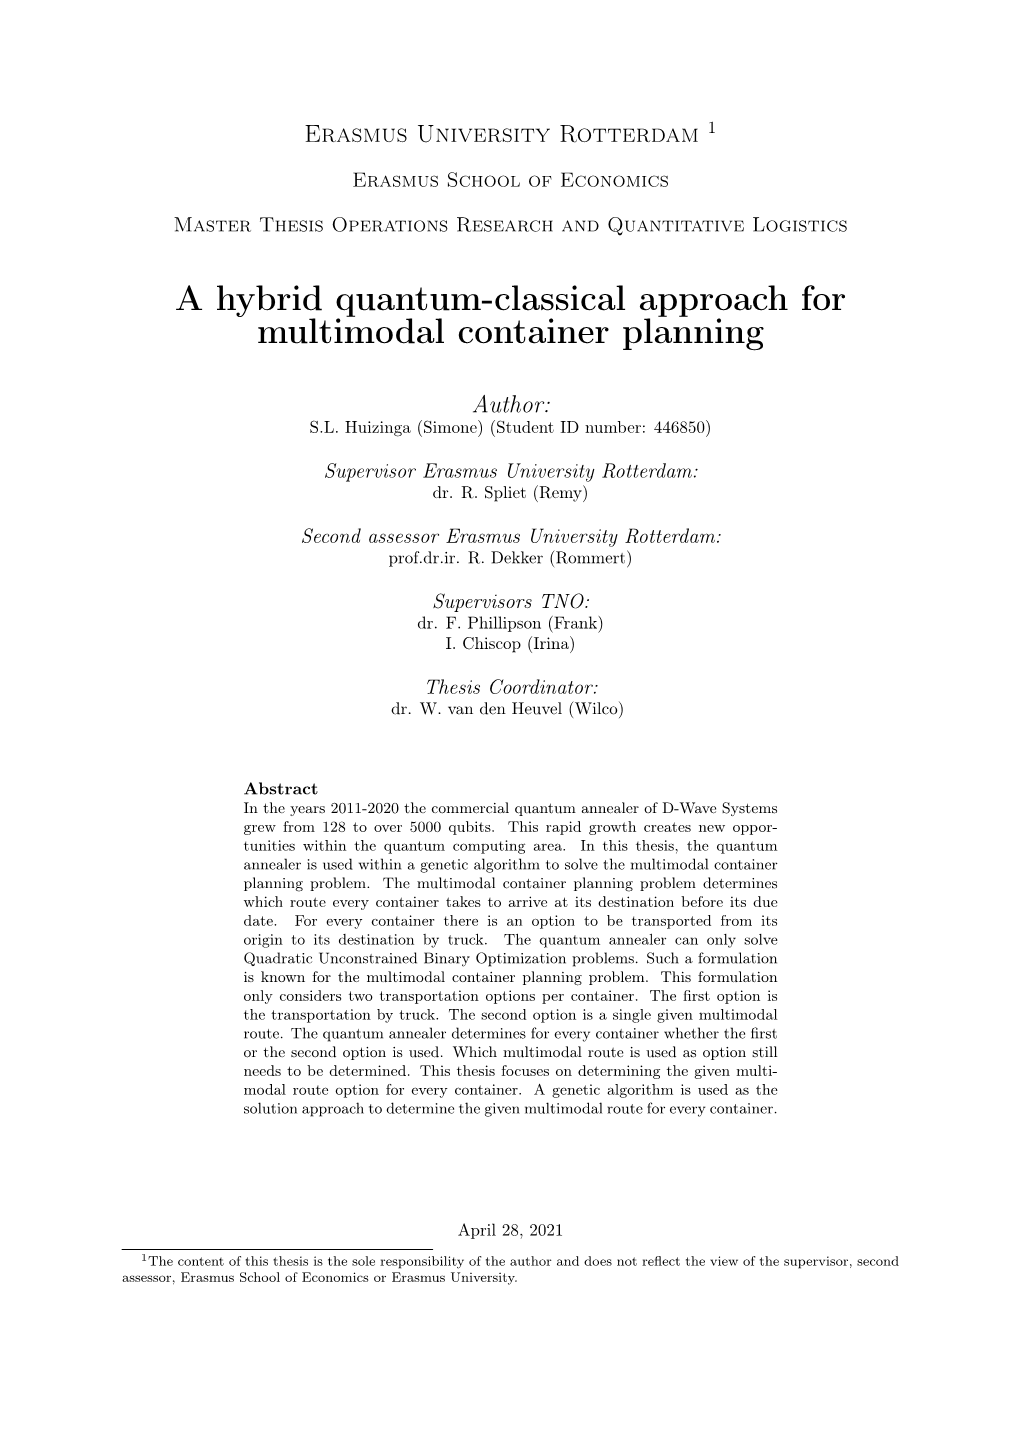 A Hybrid Quantum-Classical Approach for Multimodal Container Planning